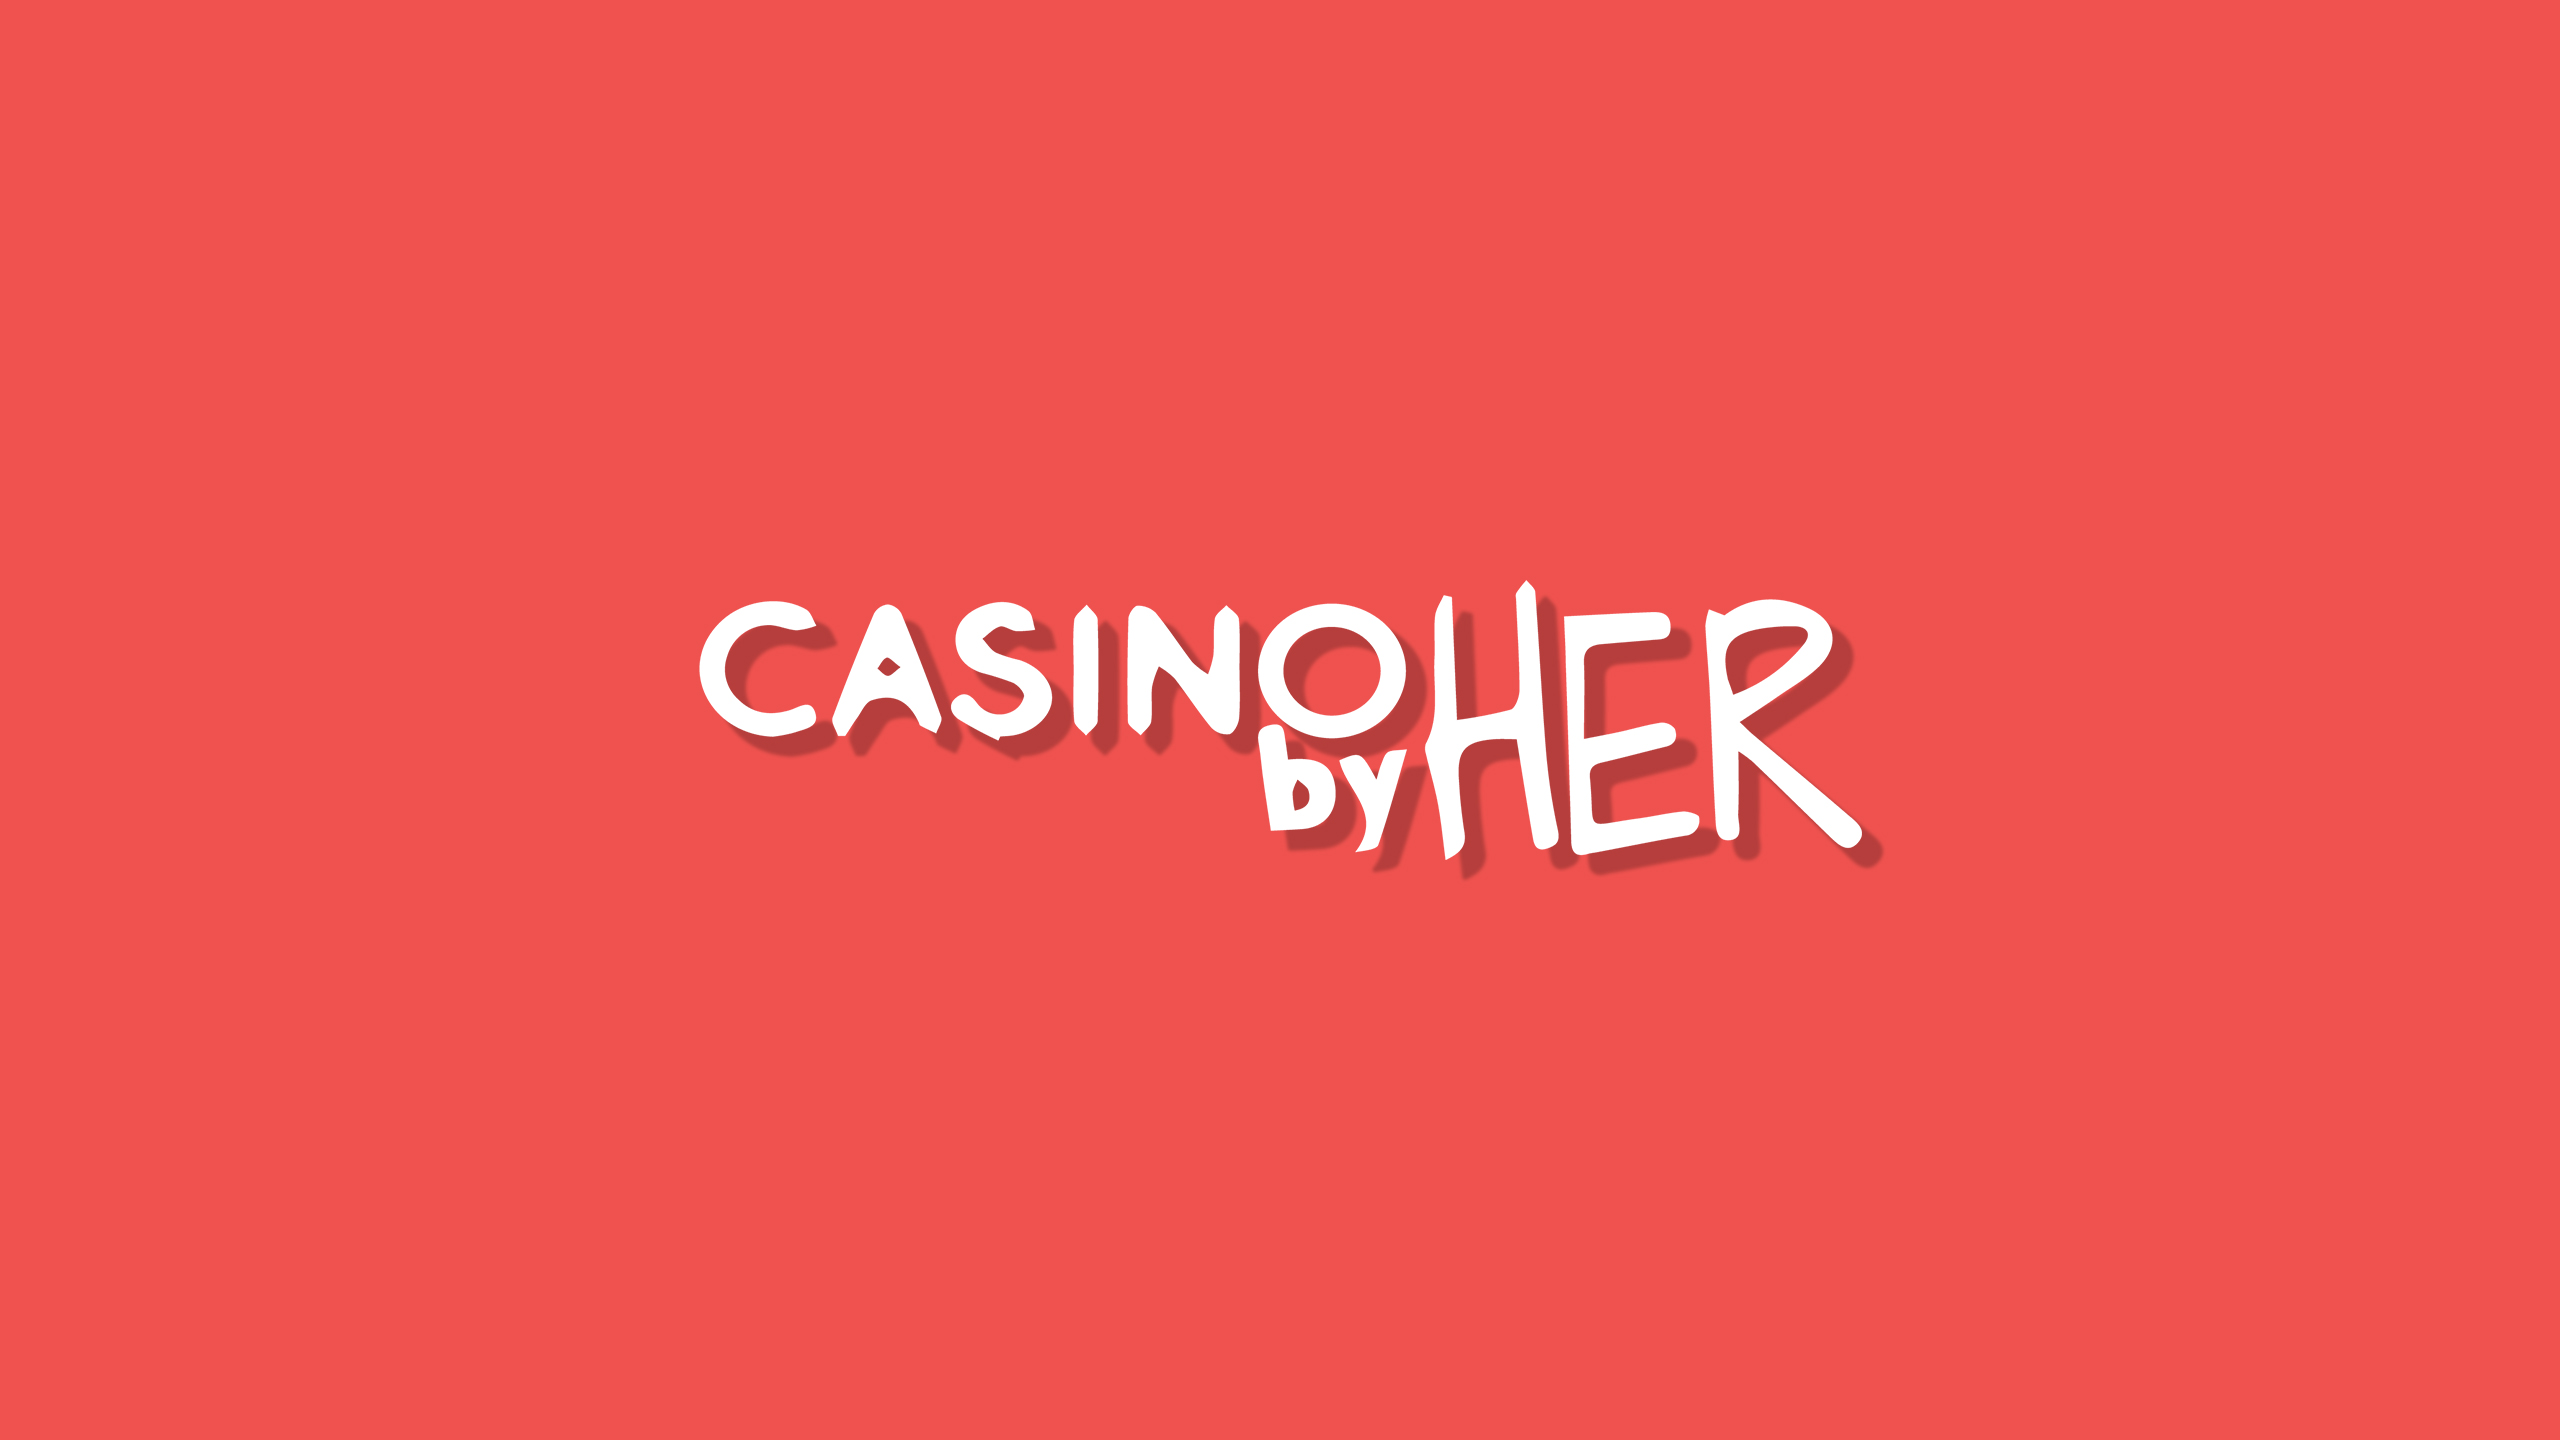 Casino by Her